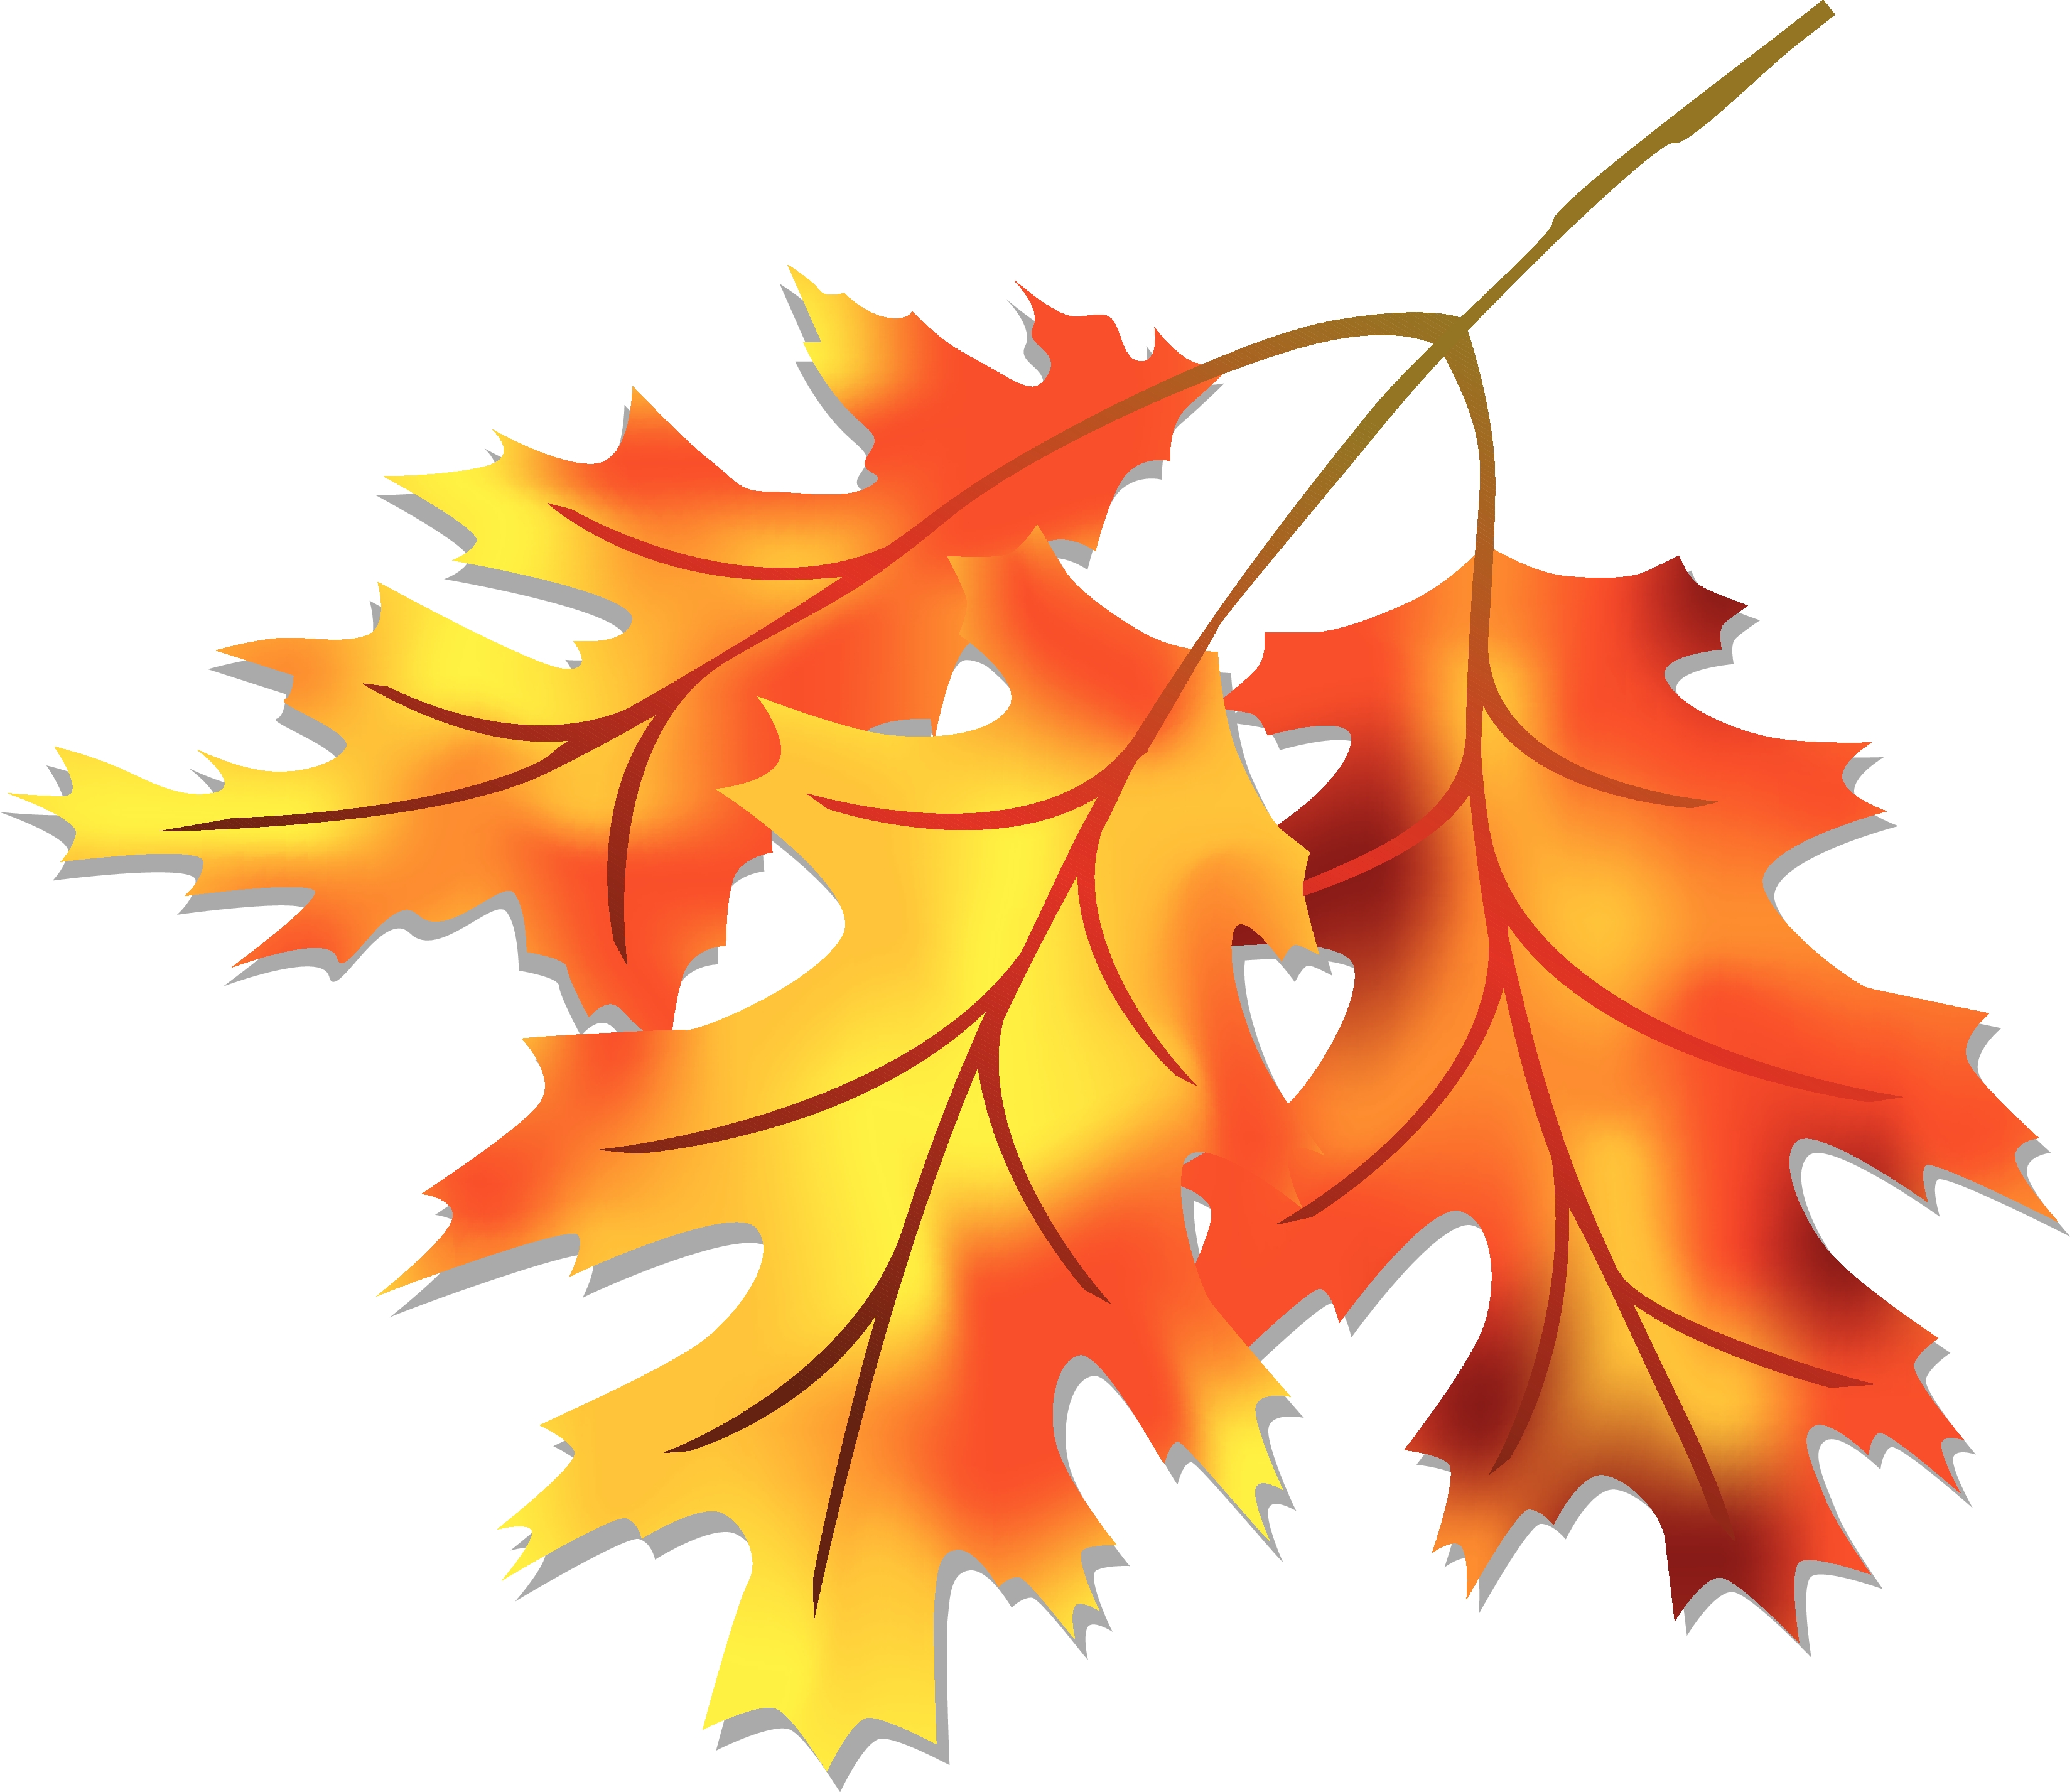 Leaf fall leaves clipart free clipart images clipartix